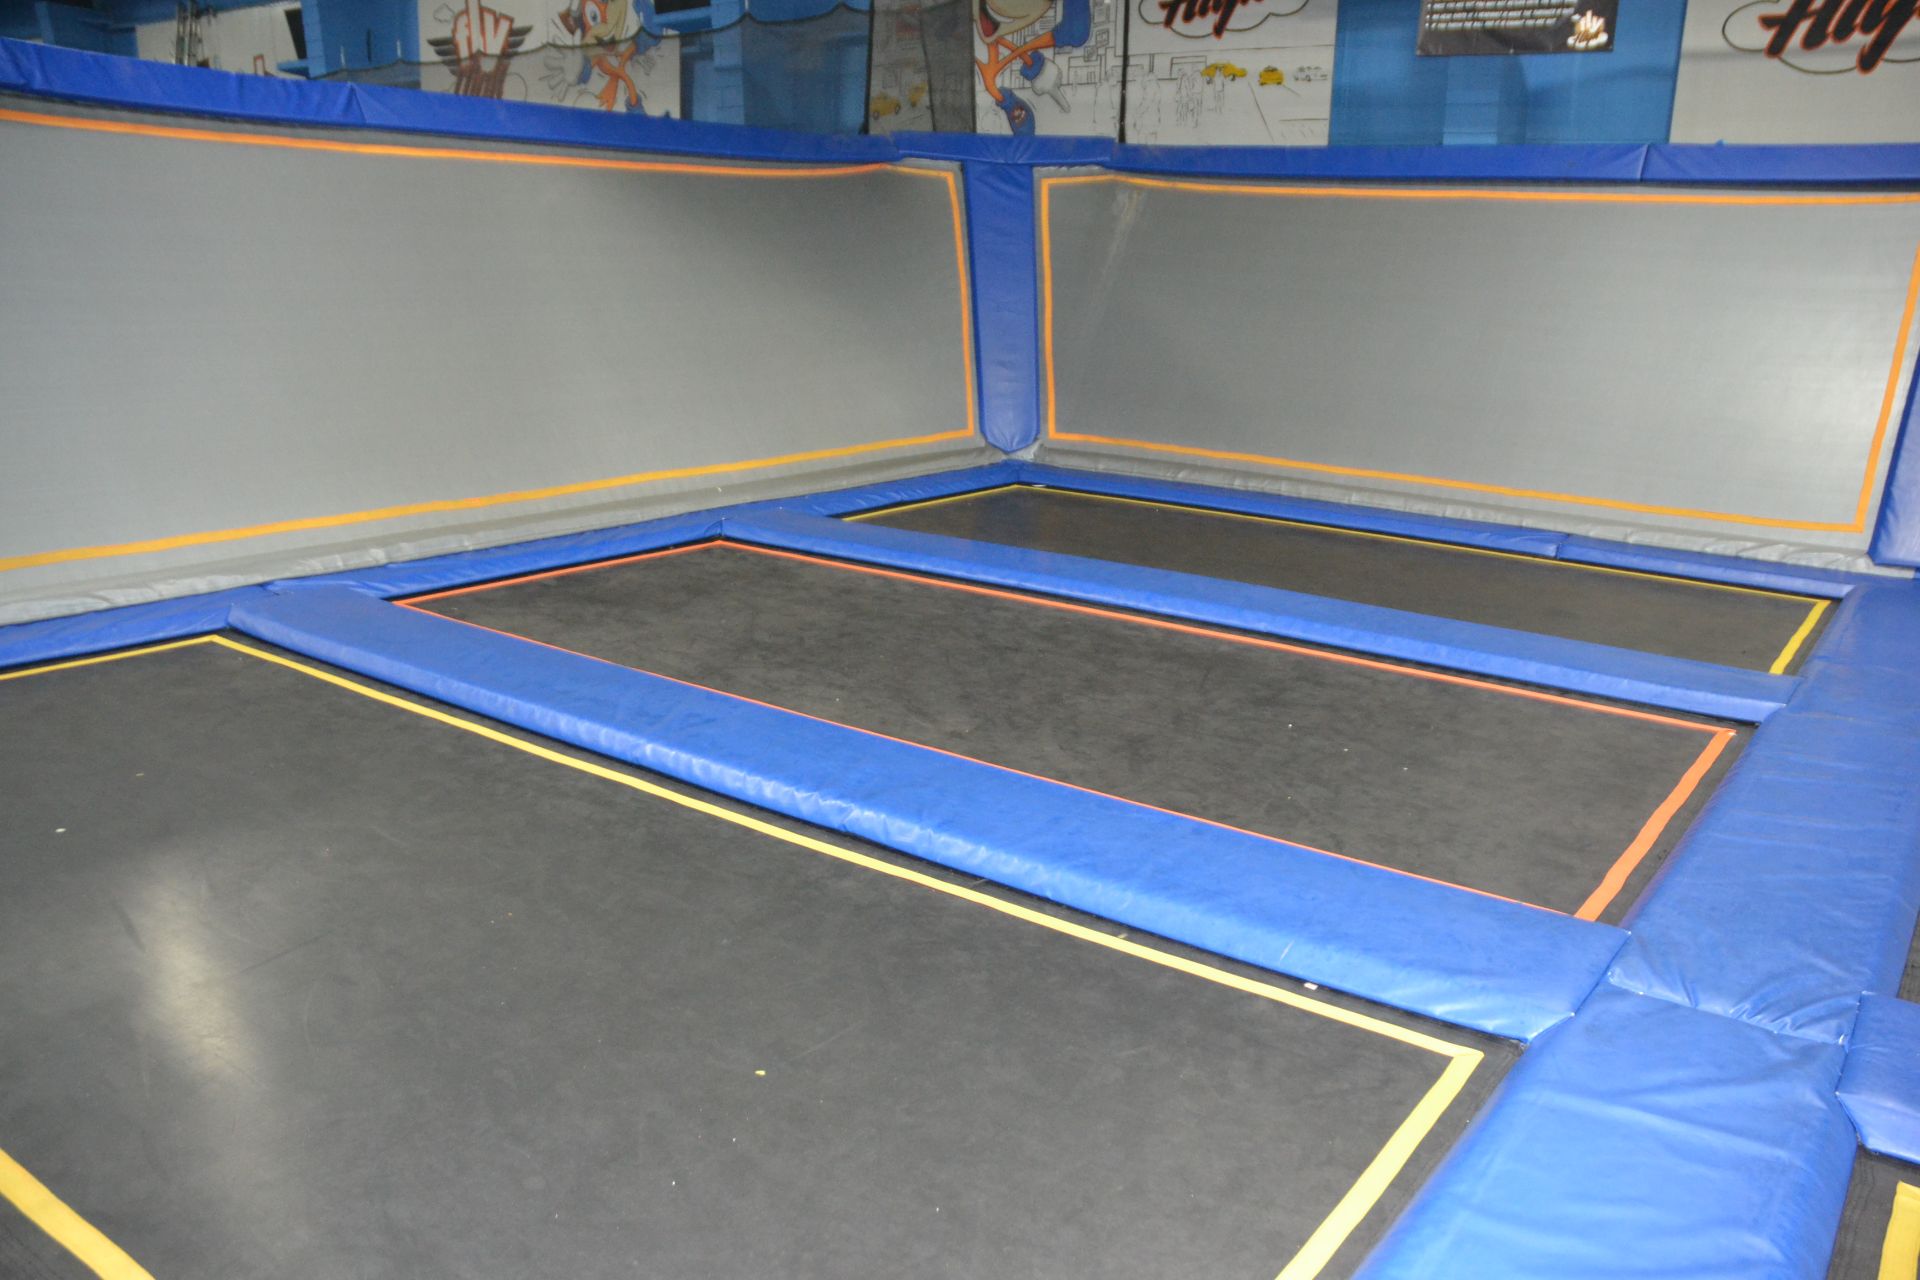 Trampoline Area Including: (6) 17 1/2' x 7 1/2' Trampolines, (4) Wall Trampolines), Netting & - Image 2 of 2